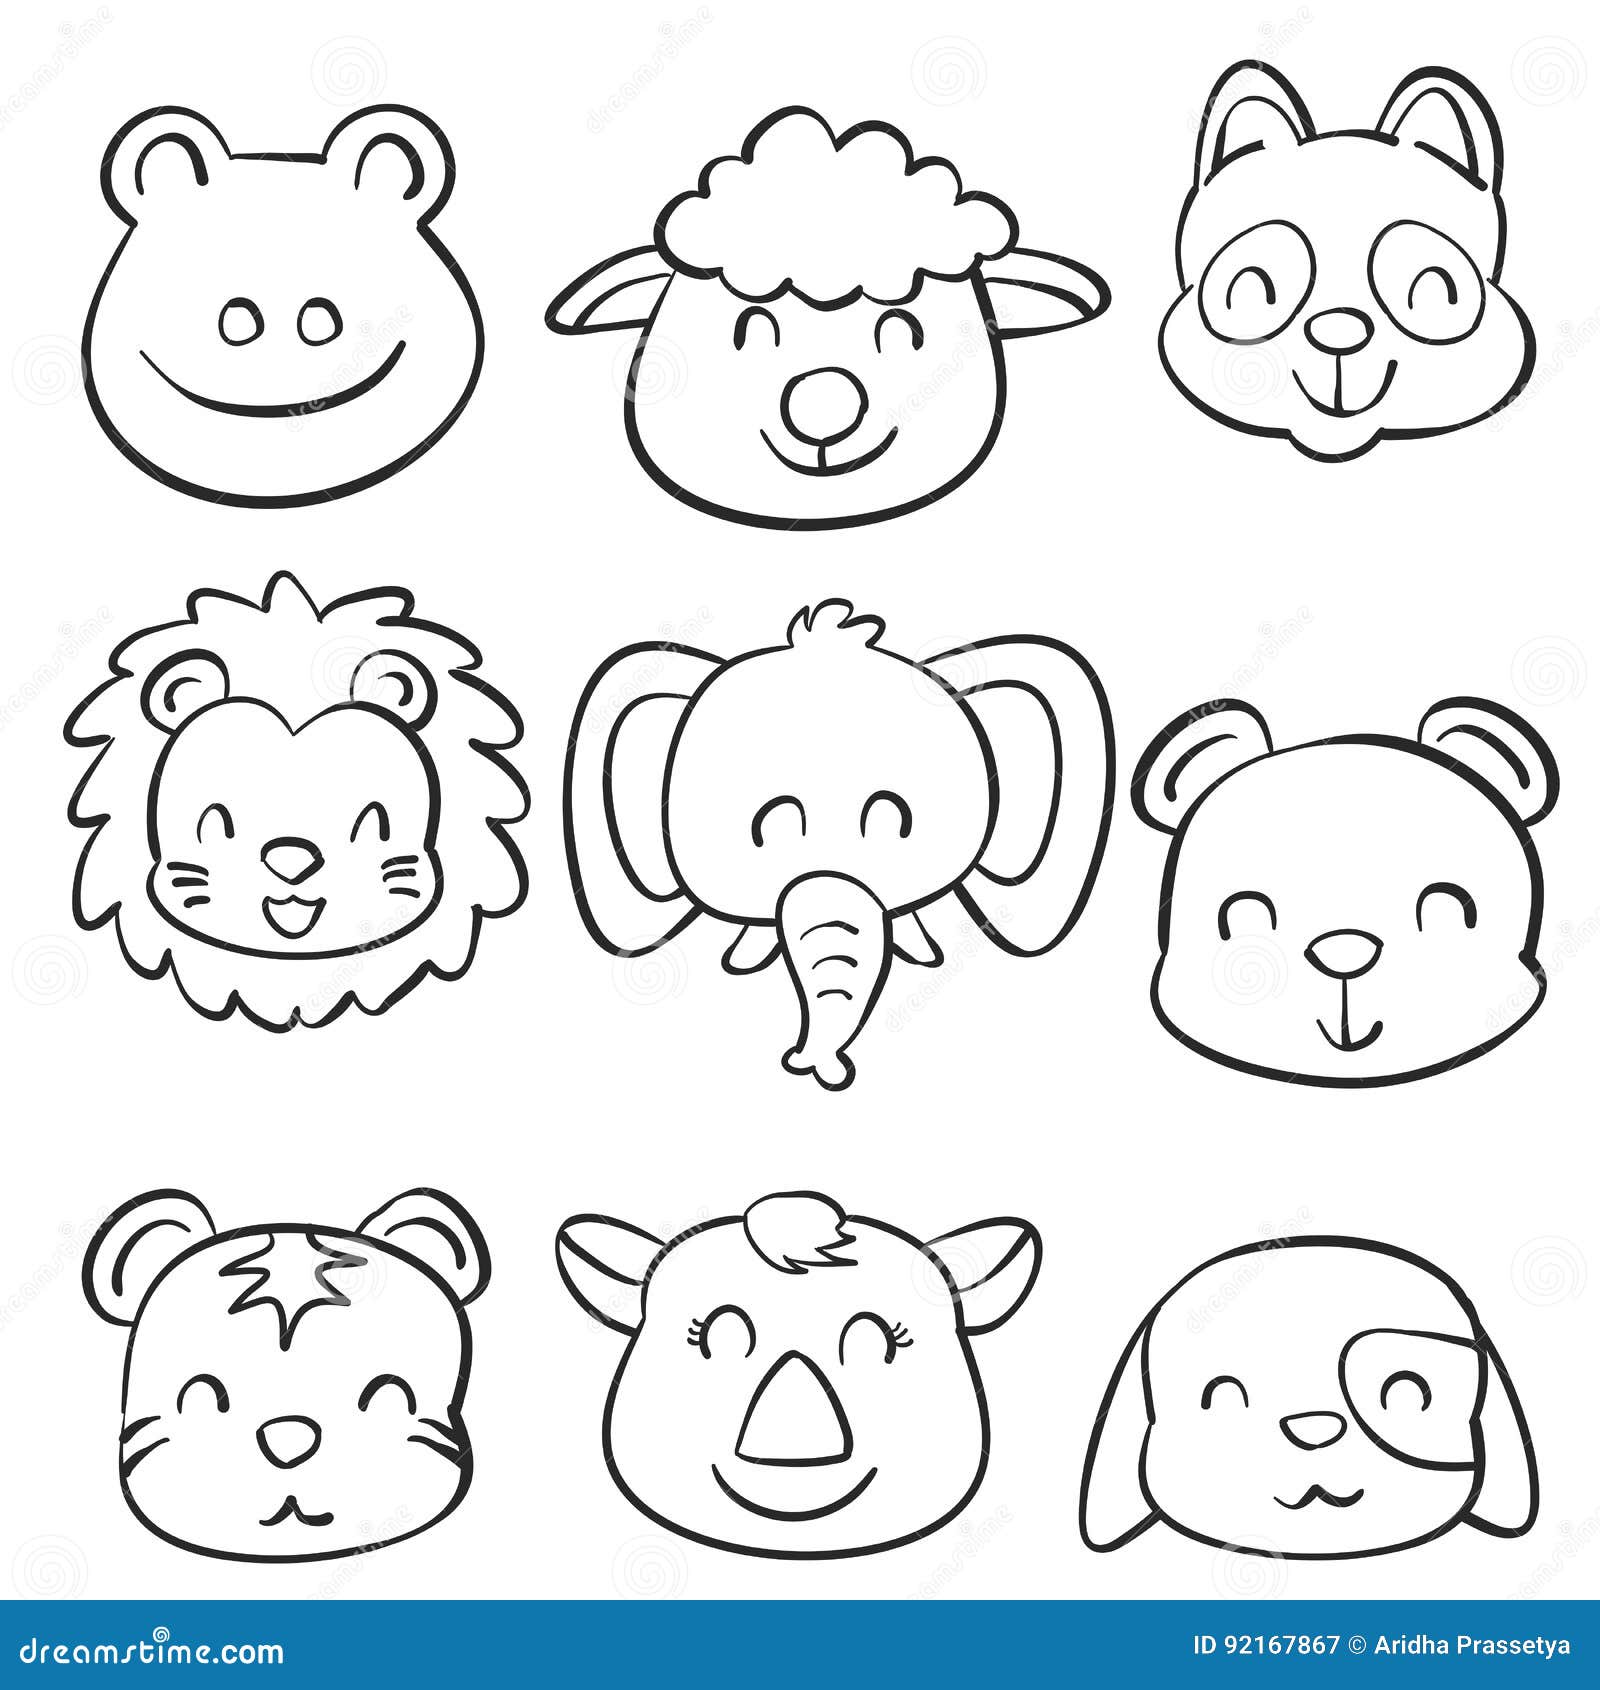 Collection Stock Cute Animal Doodles Stock Vector - Illustration of ...